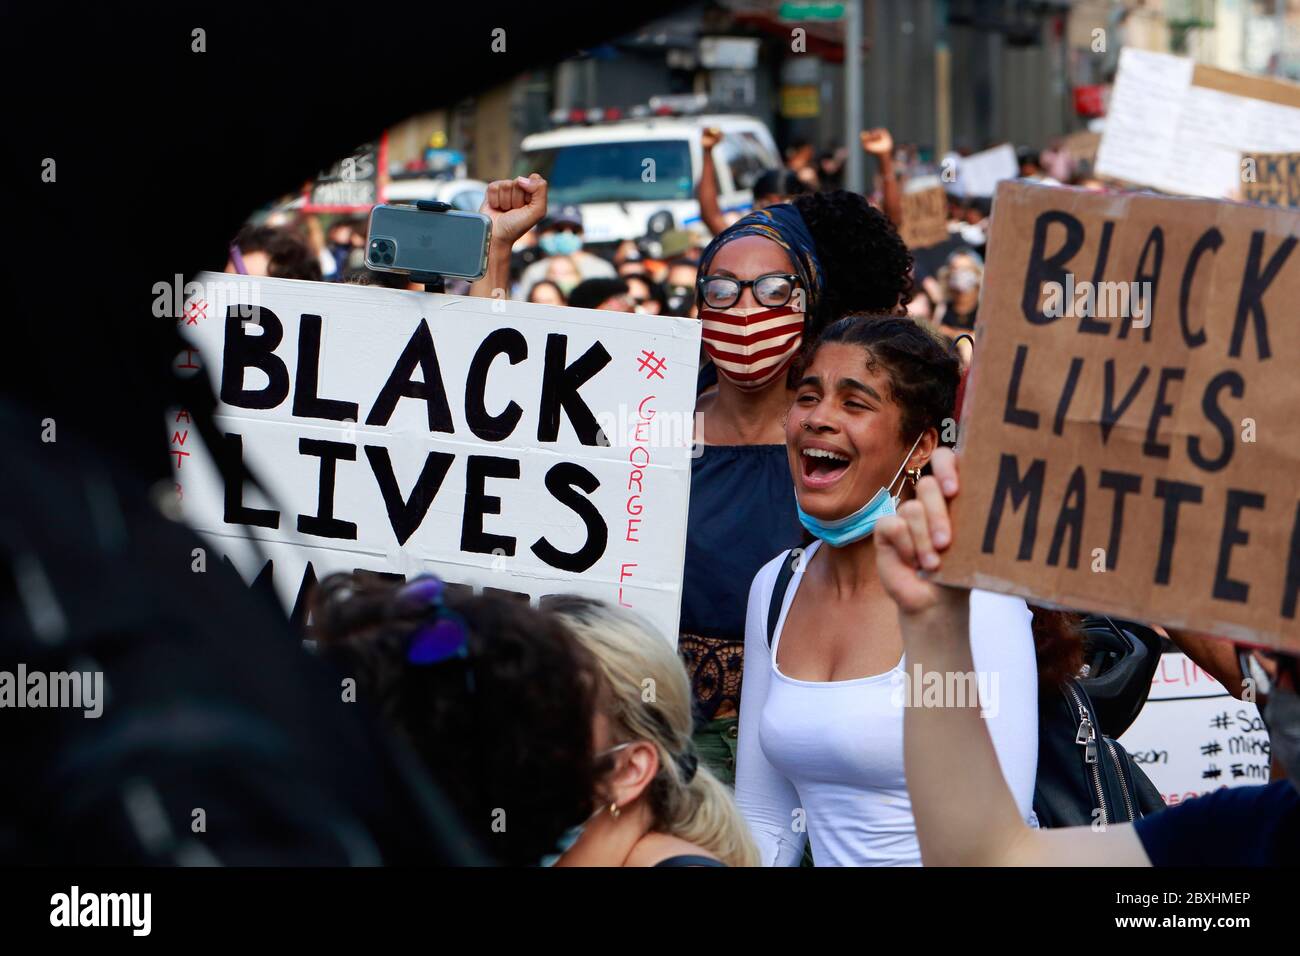 New York, NY. 6th June 2020. Surrounded by 'Black Lives Matter' signs, a woman yells in support at a Black Lives Matter solidarity march through Manhattan calling for justice in a recent string of American police killings: George Floyd, Breonna Taylor, and to countless others. Thousands of people joined in the protest march from Brooklyn crisscrossing Manhattan well past a curfew issued earlier in the week to curb organized burglaries and looting. June 6, 2020 Stock Photo